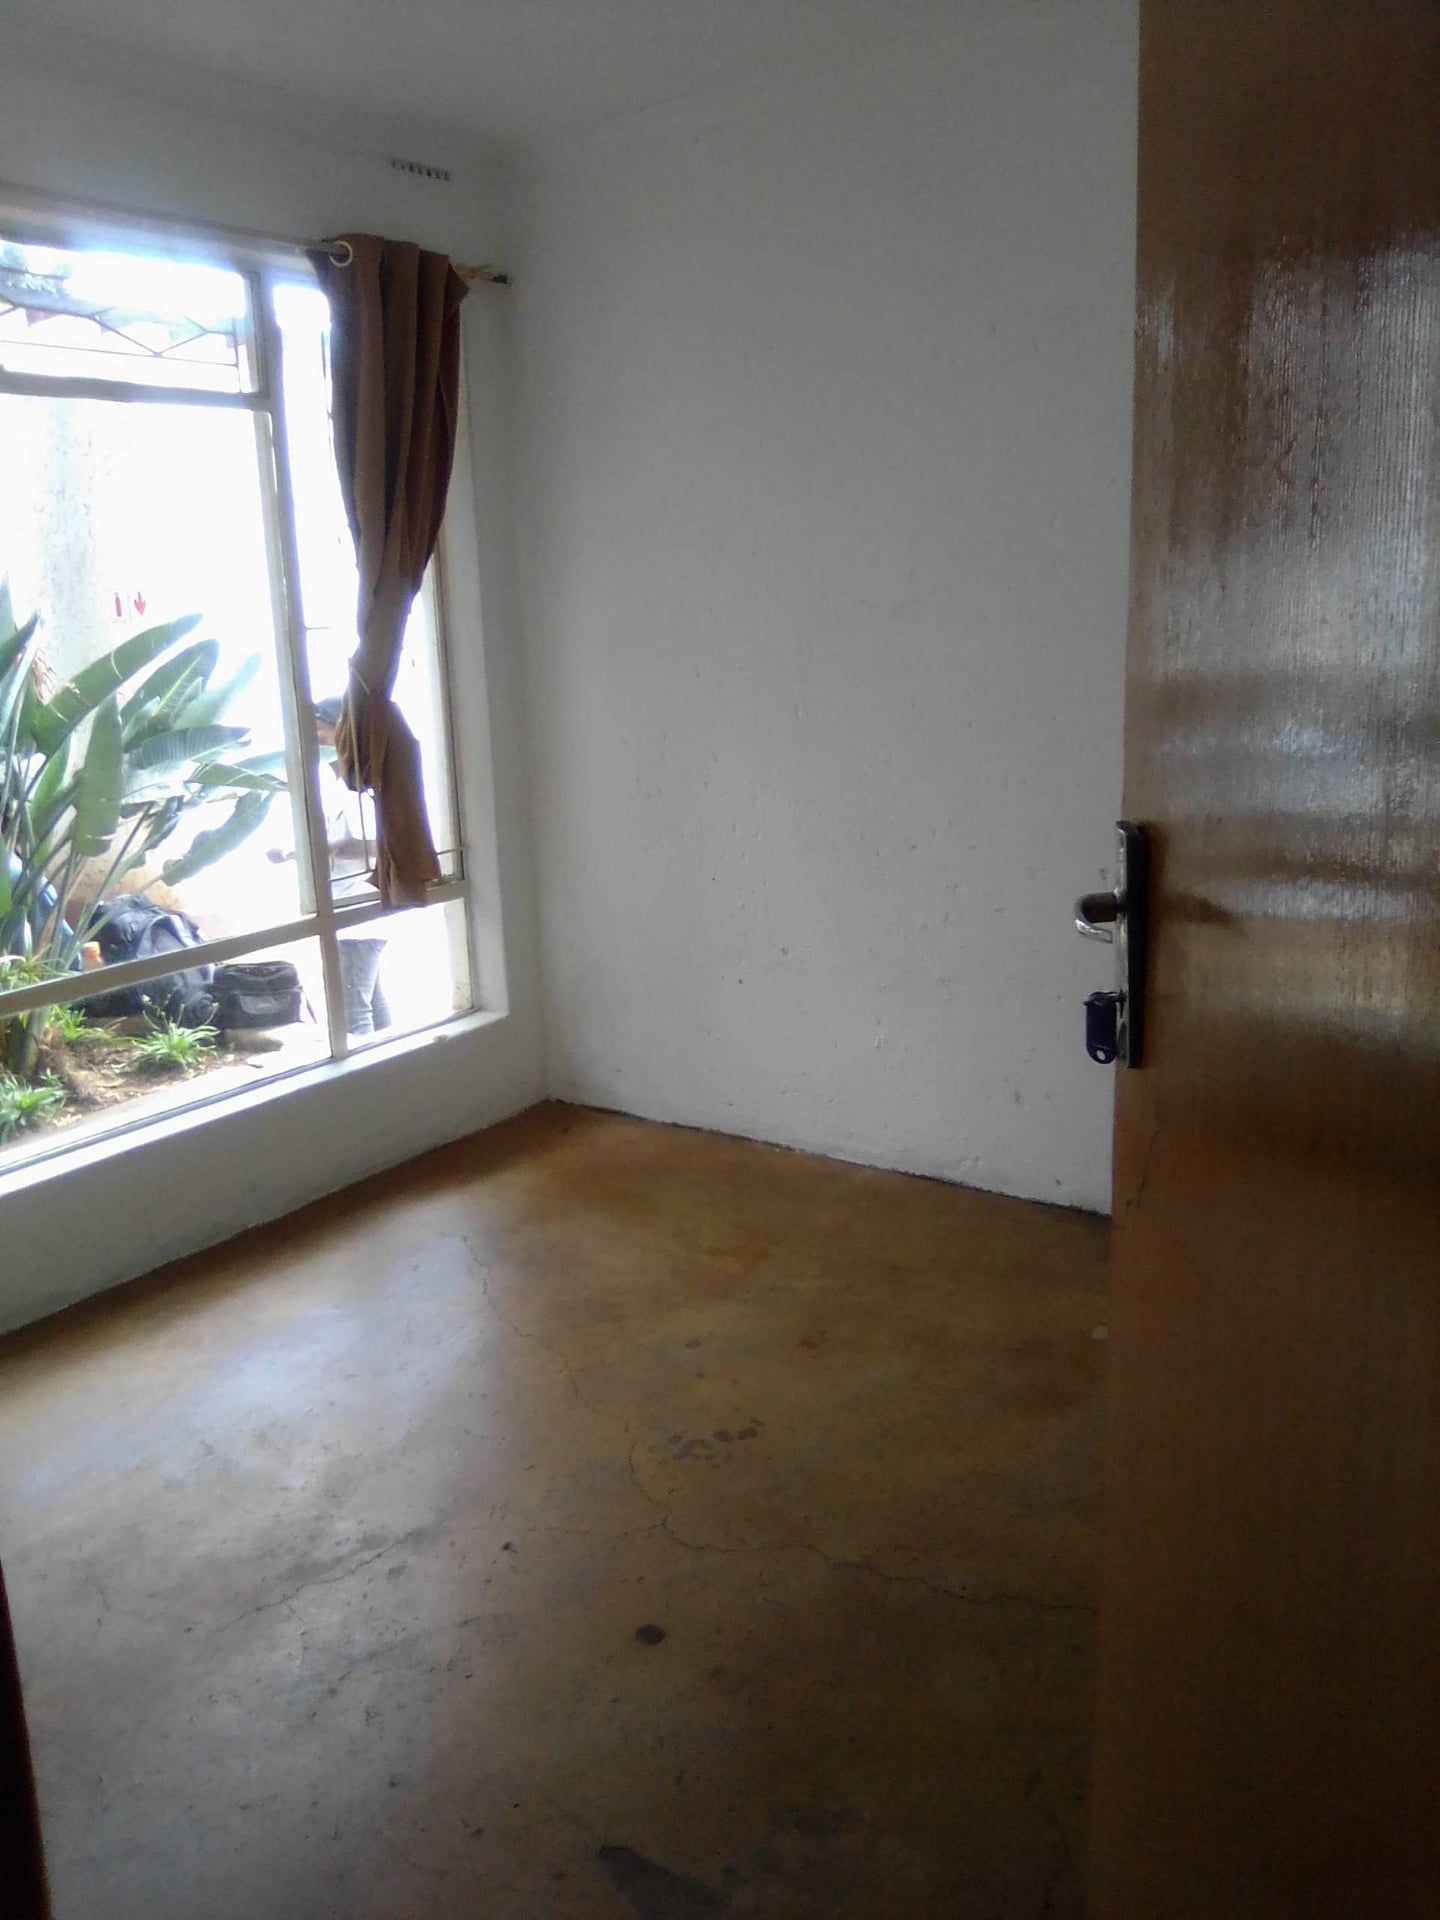 Affordable short to long term accommodation in Rosebank